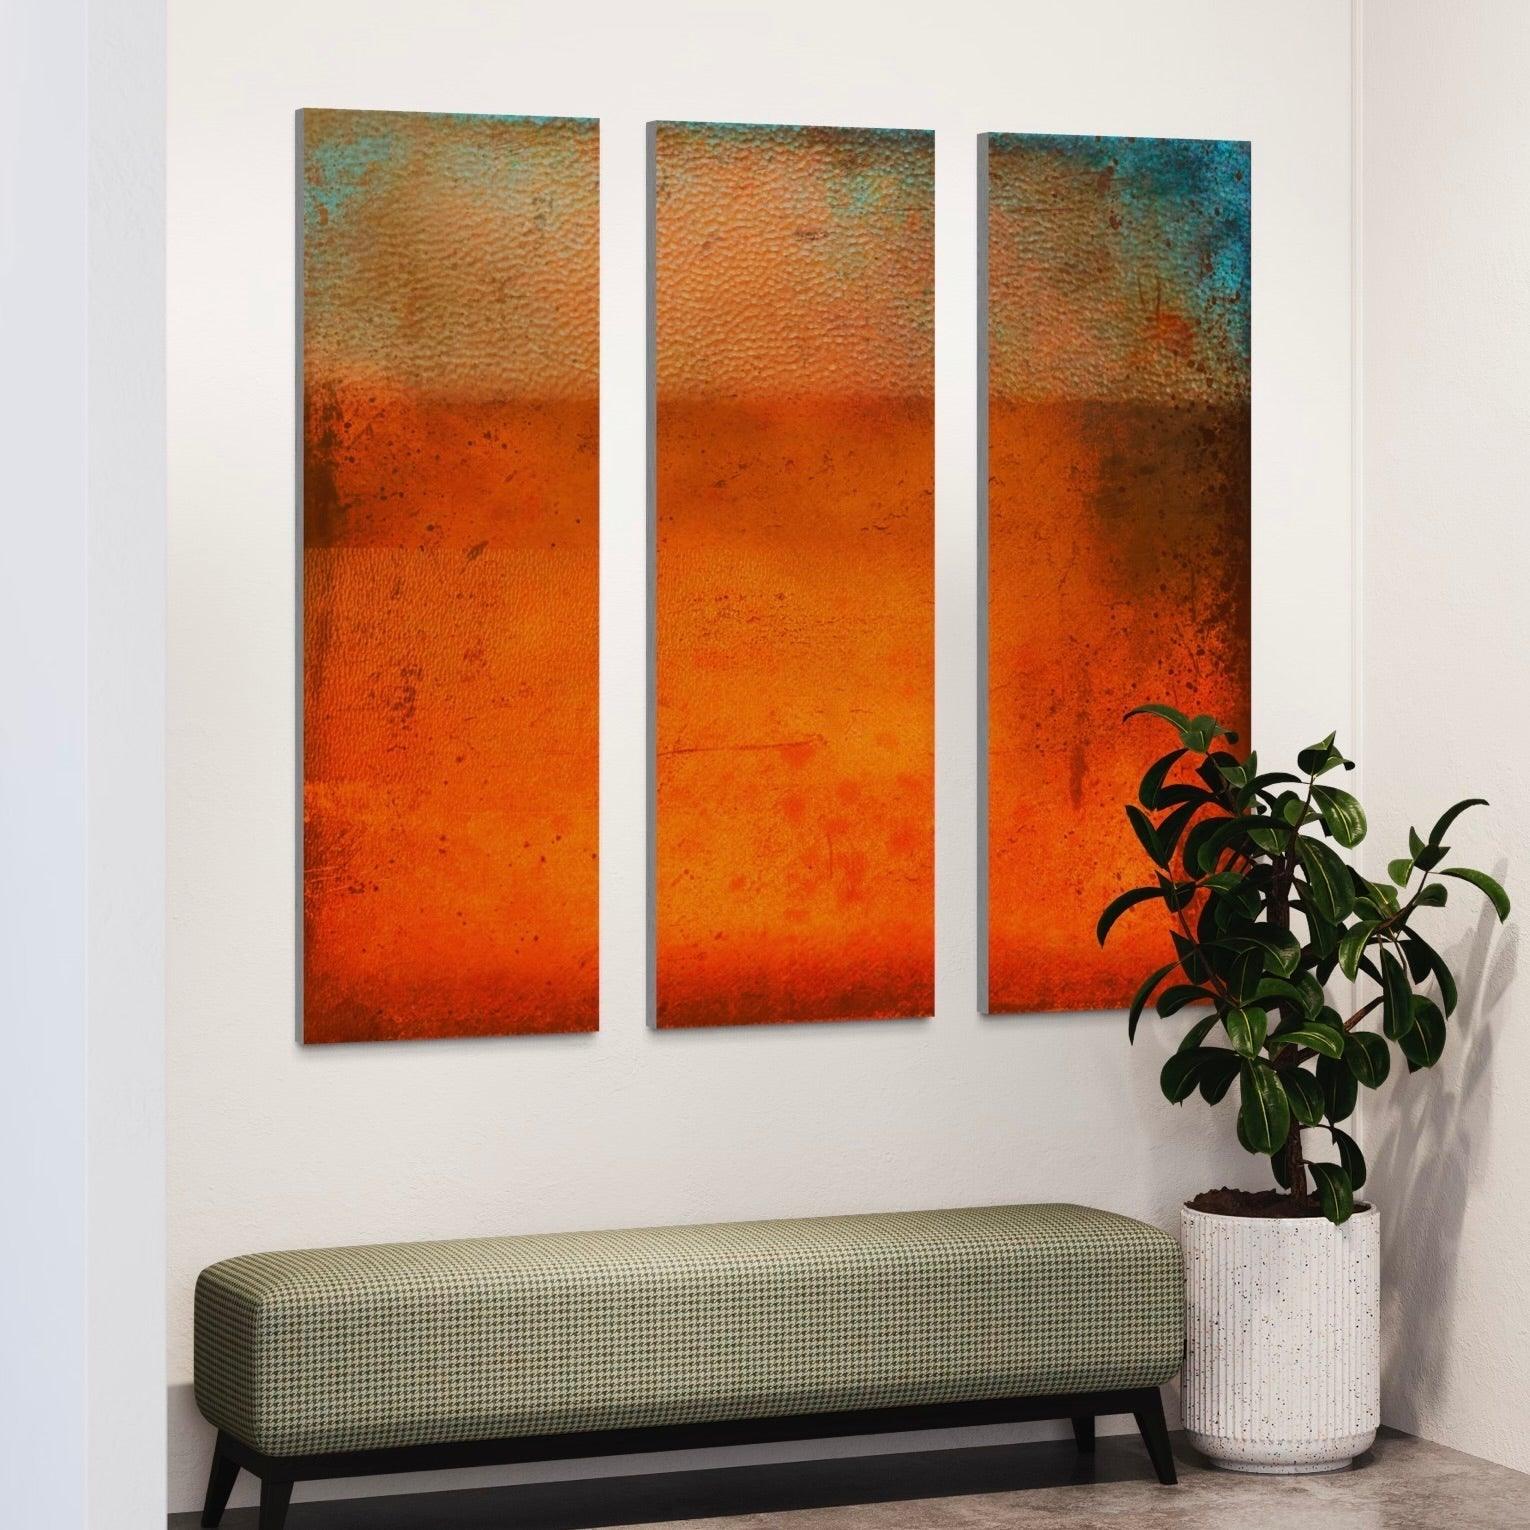 Sunrise Horizon Abstract Painting Signed Fine Art Triptych Canvas-Statement Wall Art-Abstract & Impressionistic Art Gallery-Paintings, Prints, Homeware, Art Gifts From Scotland By Scottish Artist Kevin Hunter